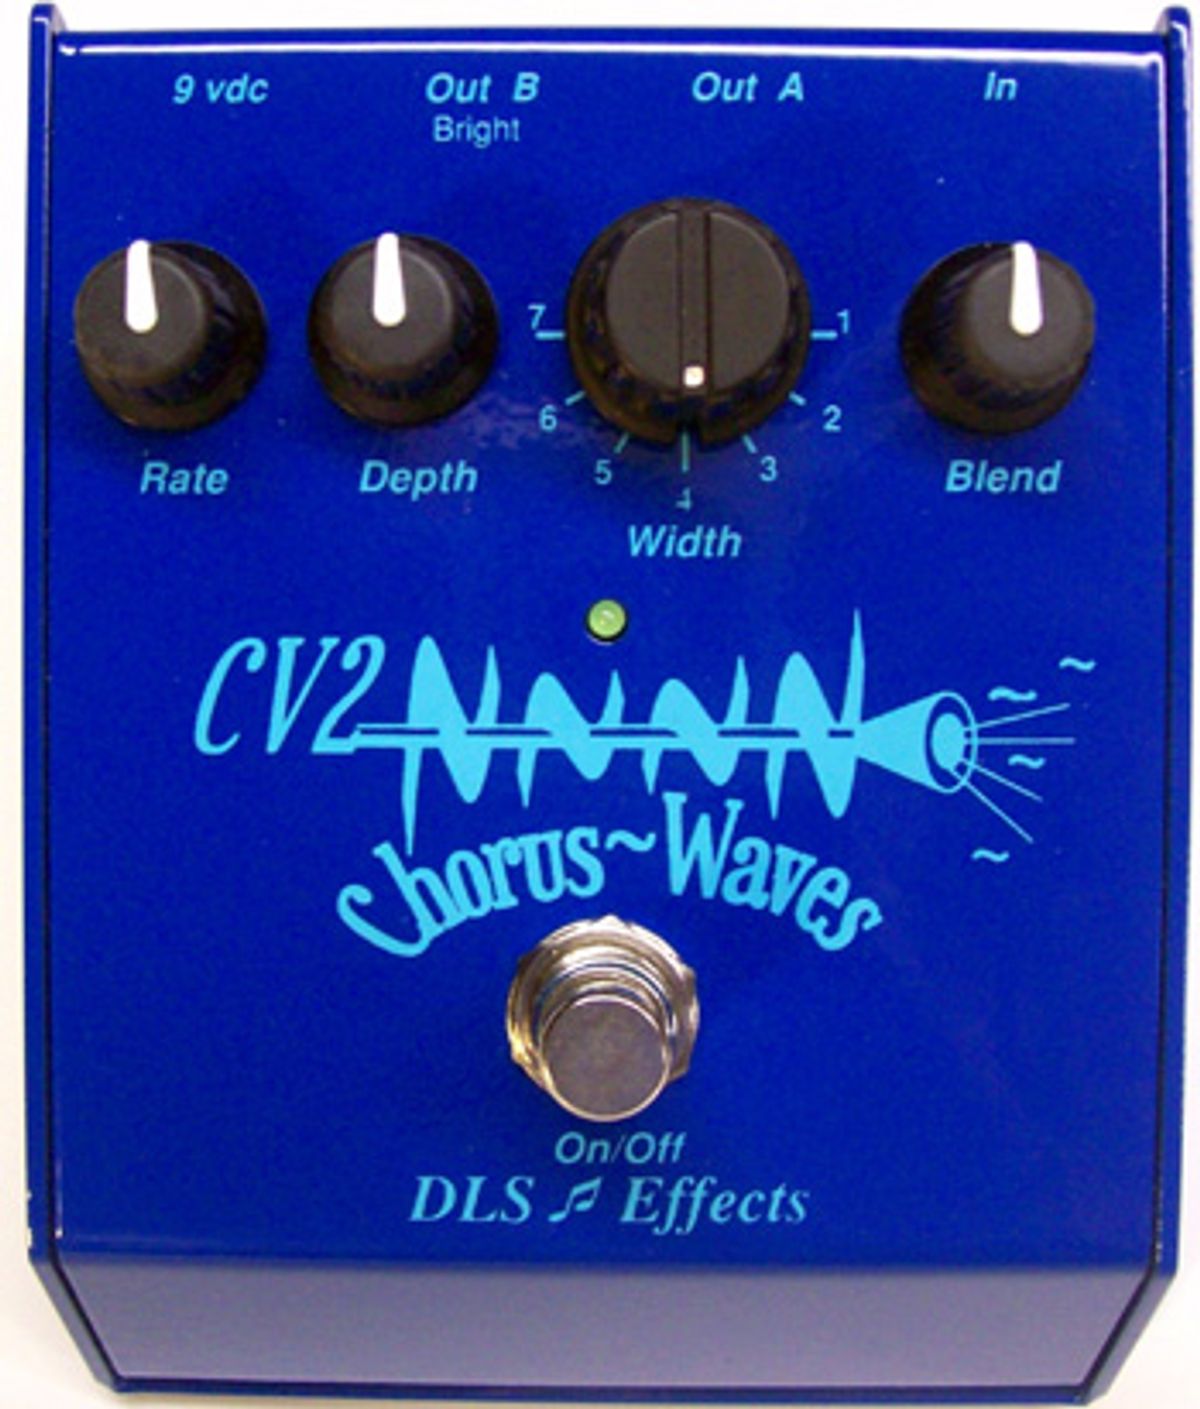 DLS Effects Releases Stereo Chorus Waves